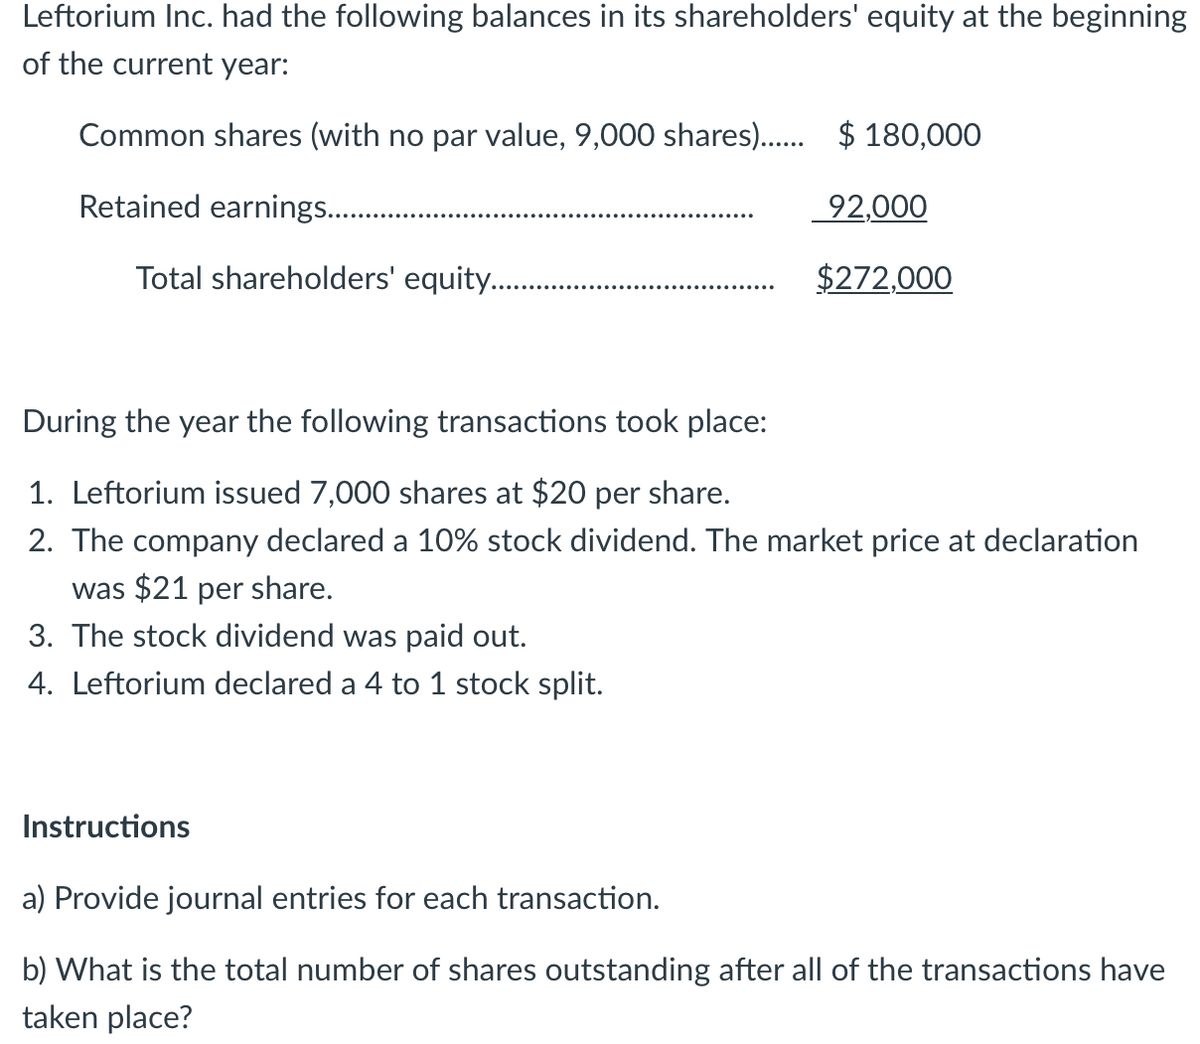 Leftorium Inc. had the following balances in its shareholders' equity at the beginning
of the current year:
Common shares (with no par value, 9,000 shares). $ 180,000
Retained earnings..
92,000
Total shareholders' equity..
$272,000
During the year the following transactions took place:
1. Leftorium issued 7,000 shares at $20 per share.
2. The company declared a 10% stock dividend. The market price at declaration
was $21 per share.
3. The stock dividend was paid out.
4. Leftorium declared a 4 to 1 stock split.
Instructions
a) Provide journal entries for each transaction.
b) What is the total number of shares outstanding after all of the transactions have
taken place?
